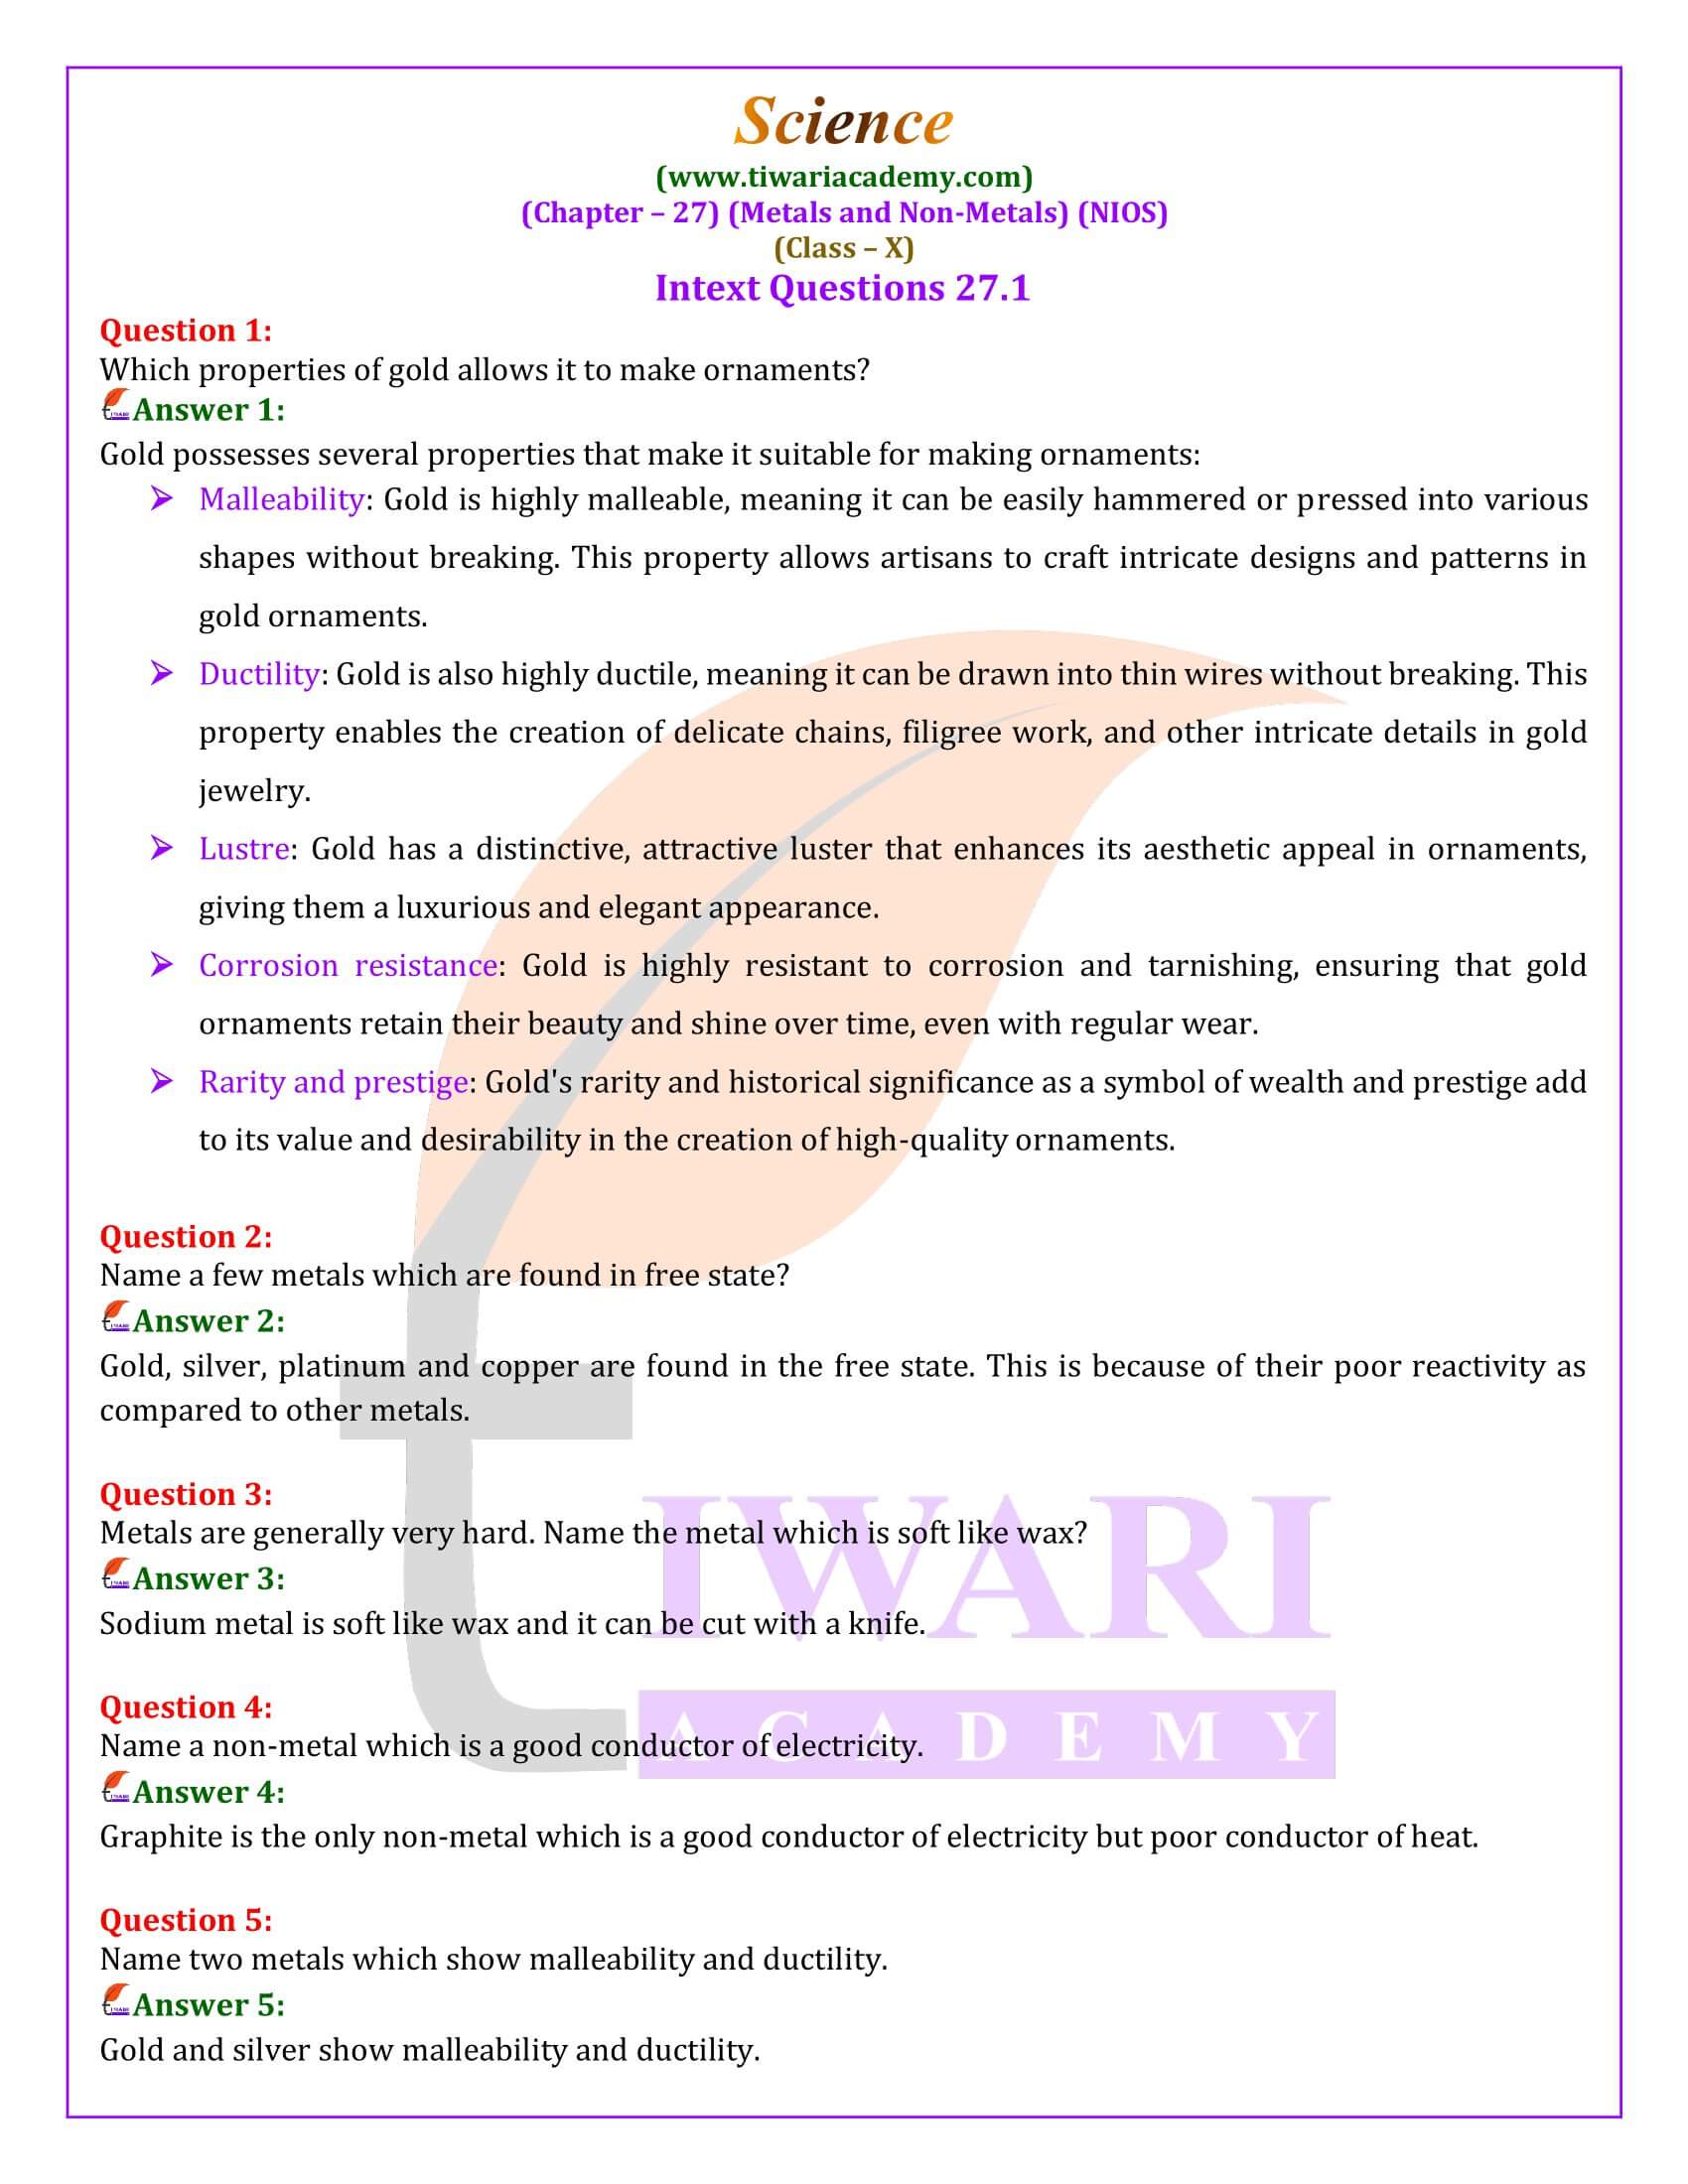 NIOS Class 10 Science Chapter 27 Metals and Non-metals Guide